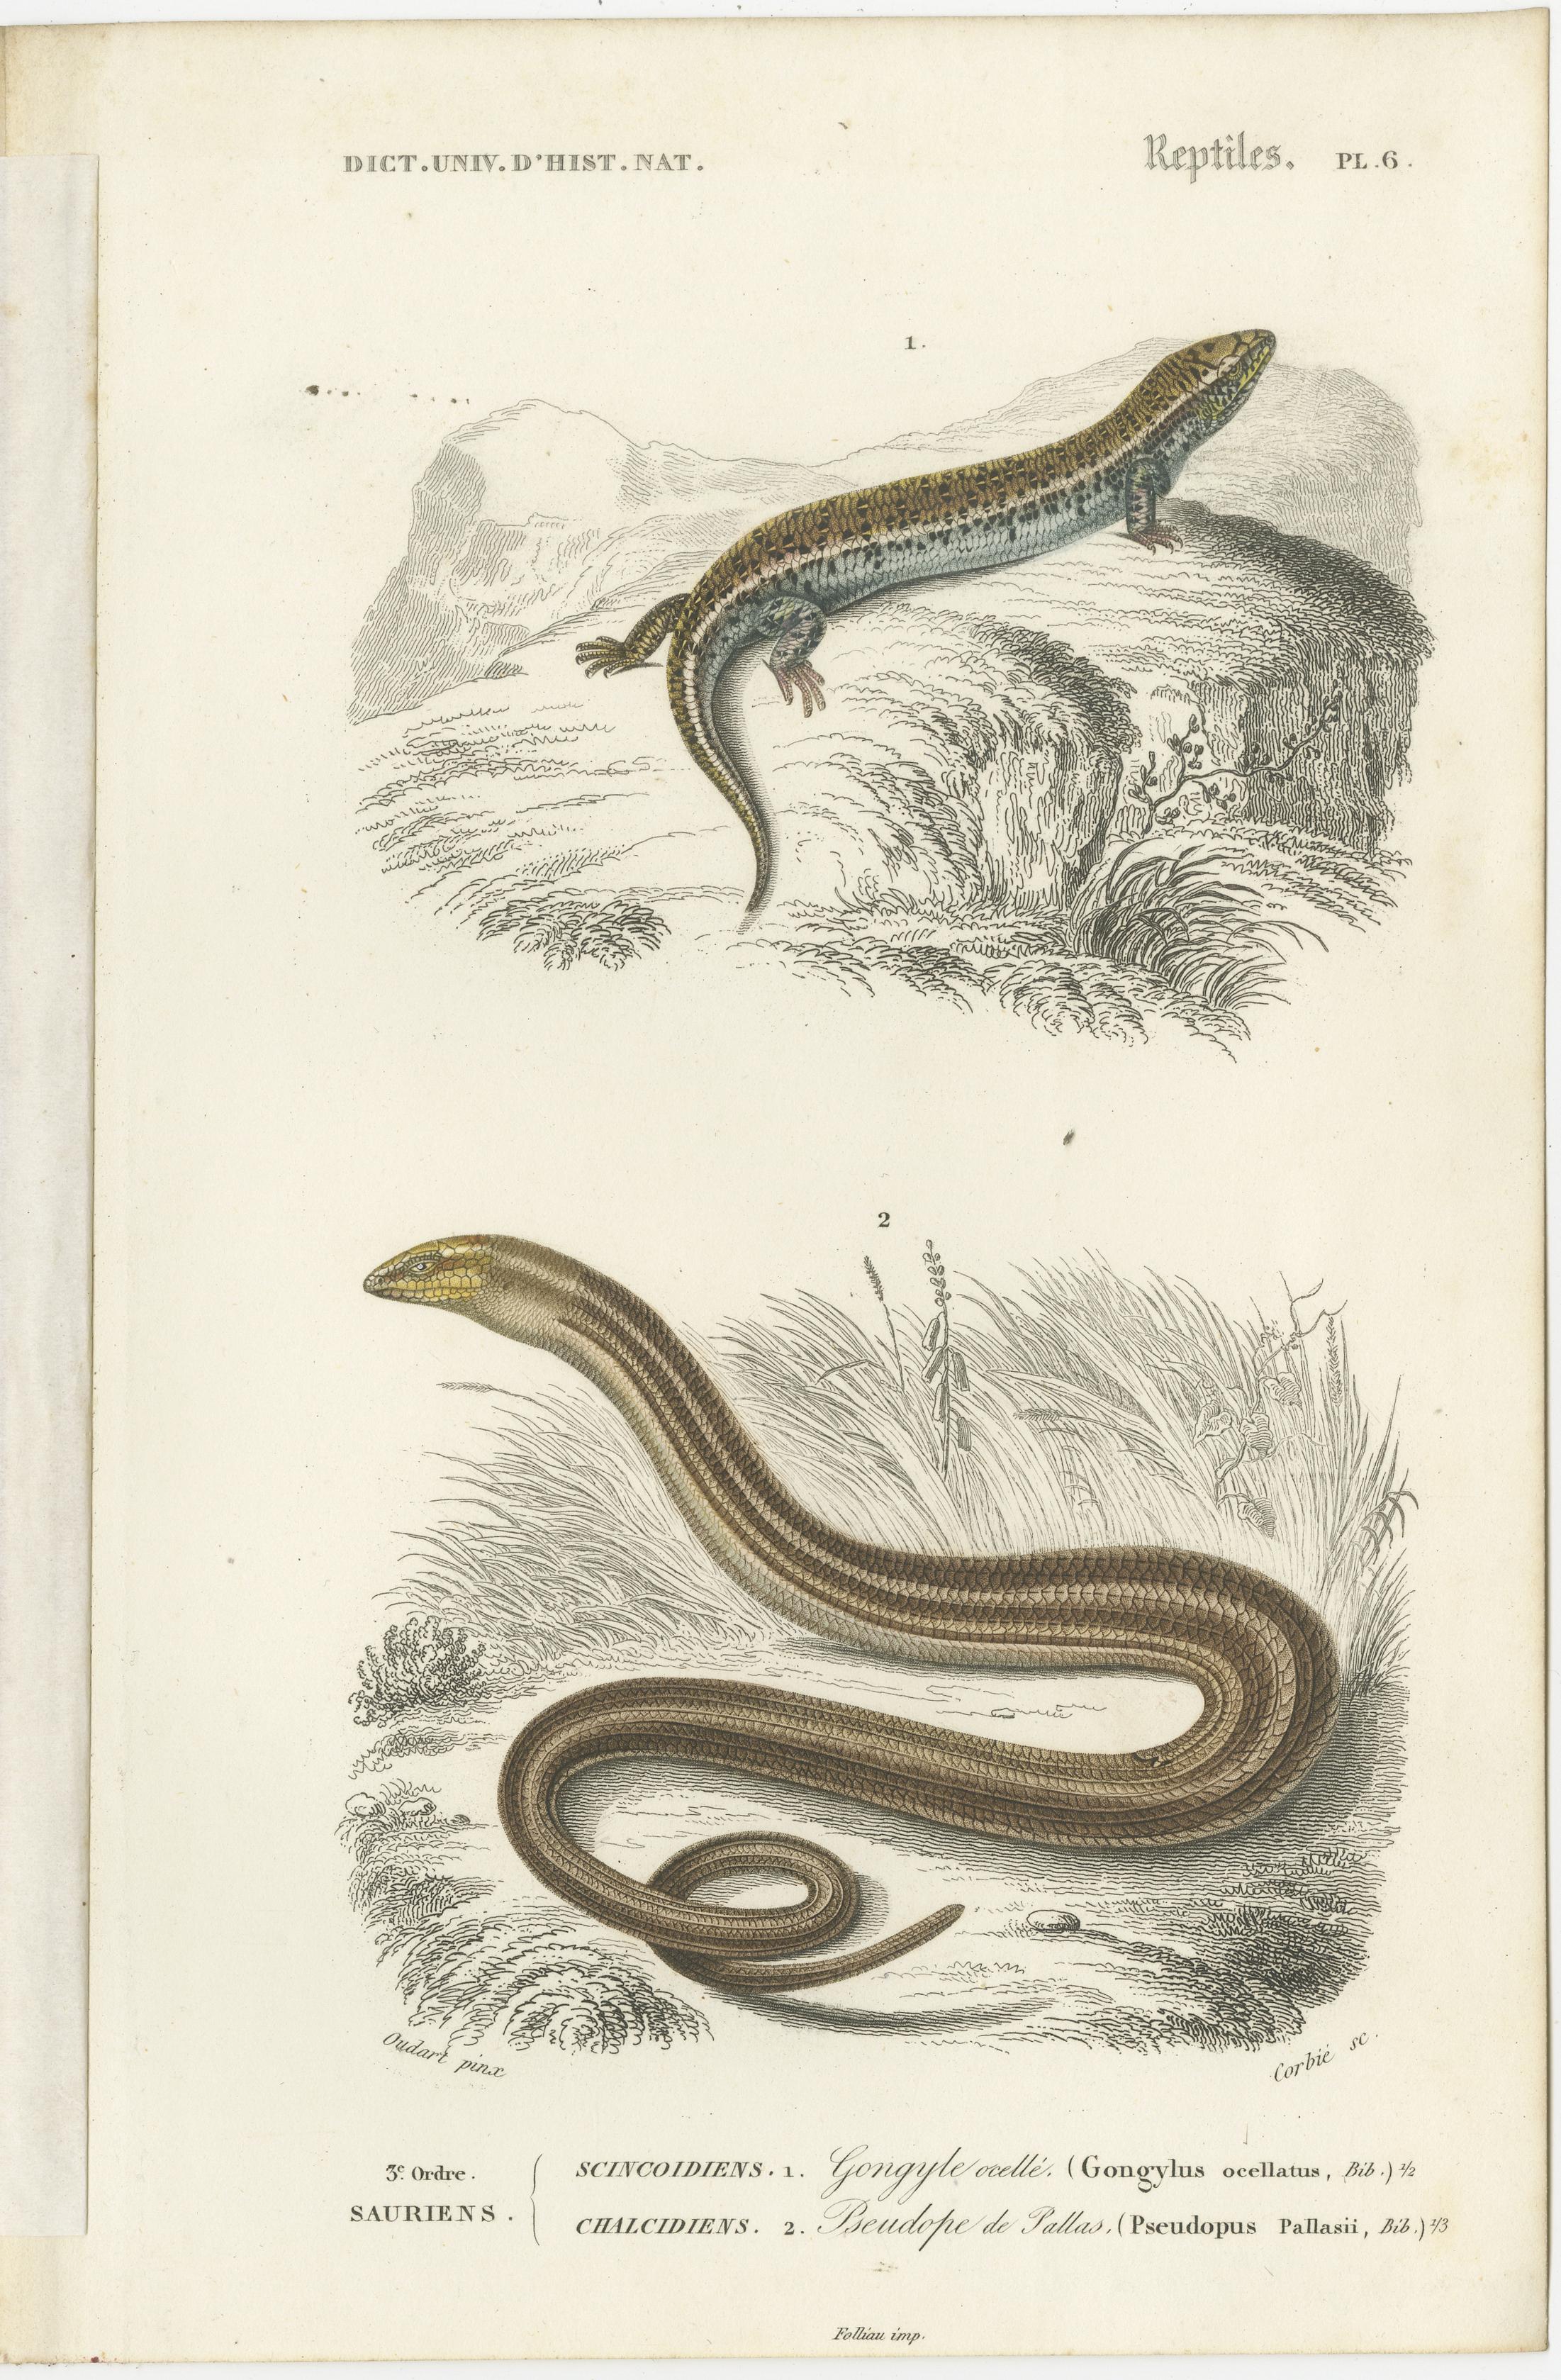 Set of 7 original antique prints of an Egyptian Cobra, other snakes and reptiles. These prints originate from 'Dictionnaire universel d'Histoire Naturelle' by d'Orbigny. Published 1861. 

Charles Henry Dessalines d'Orbigny was a French botanist